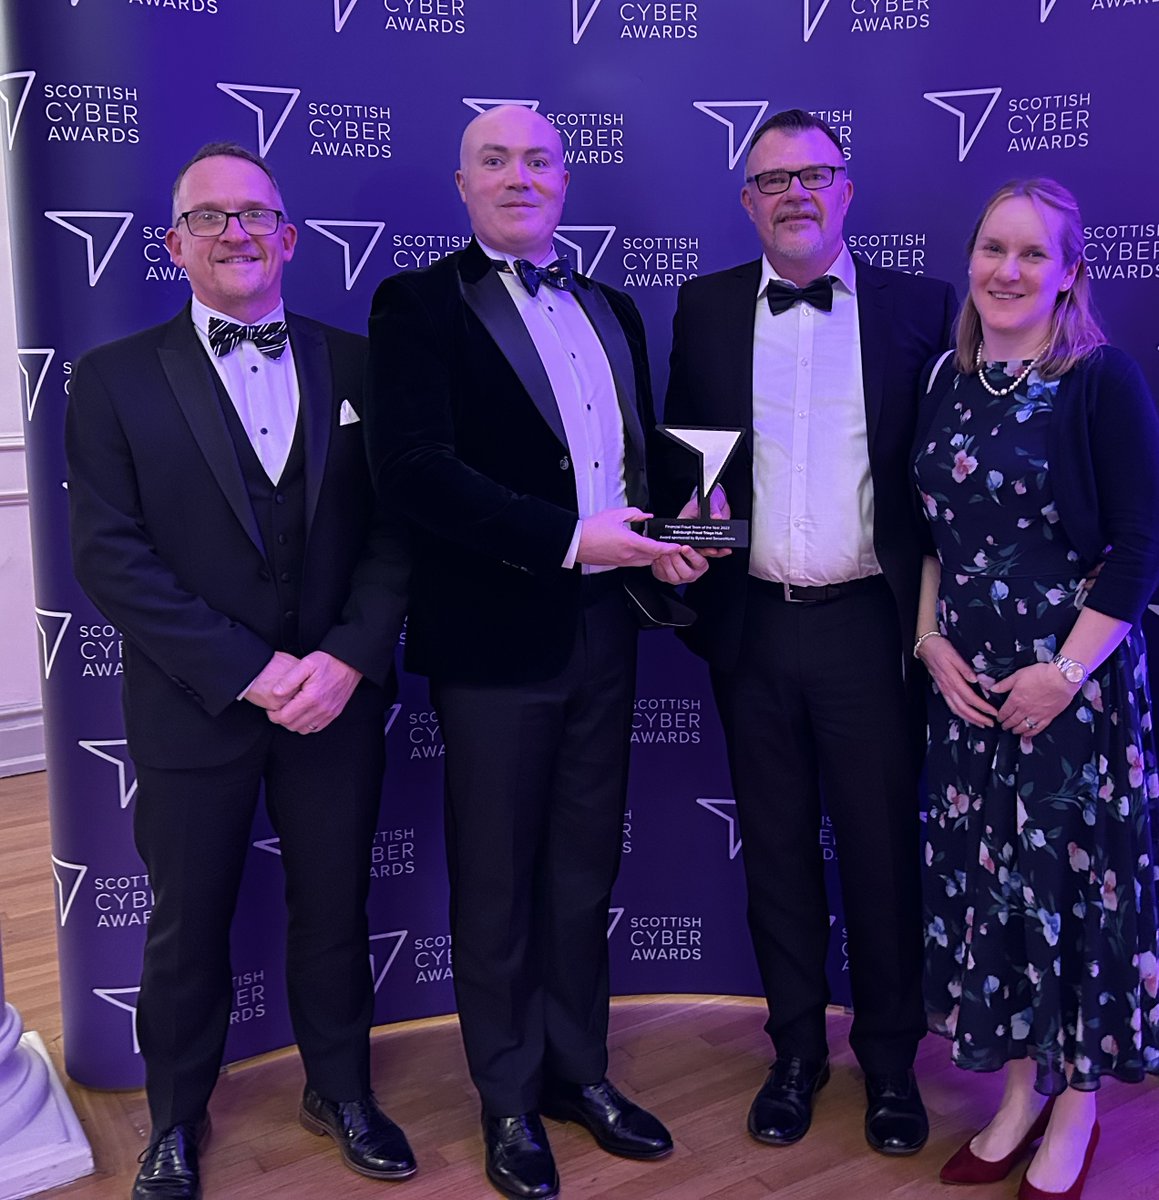 Congratulations to our Fraud Triage Hub for winning the newly introduced Financial Fraud Team of the Year Award at the @ScotCyberAwards. The award recognises the team’s knowledge and commitment to the fight against fraud and was presented at the awards held in the Assembly Rooms.